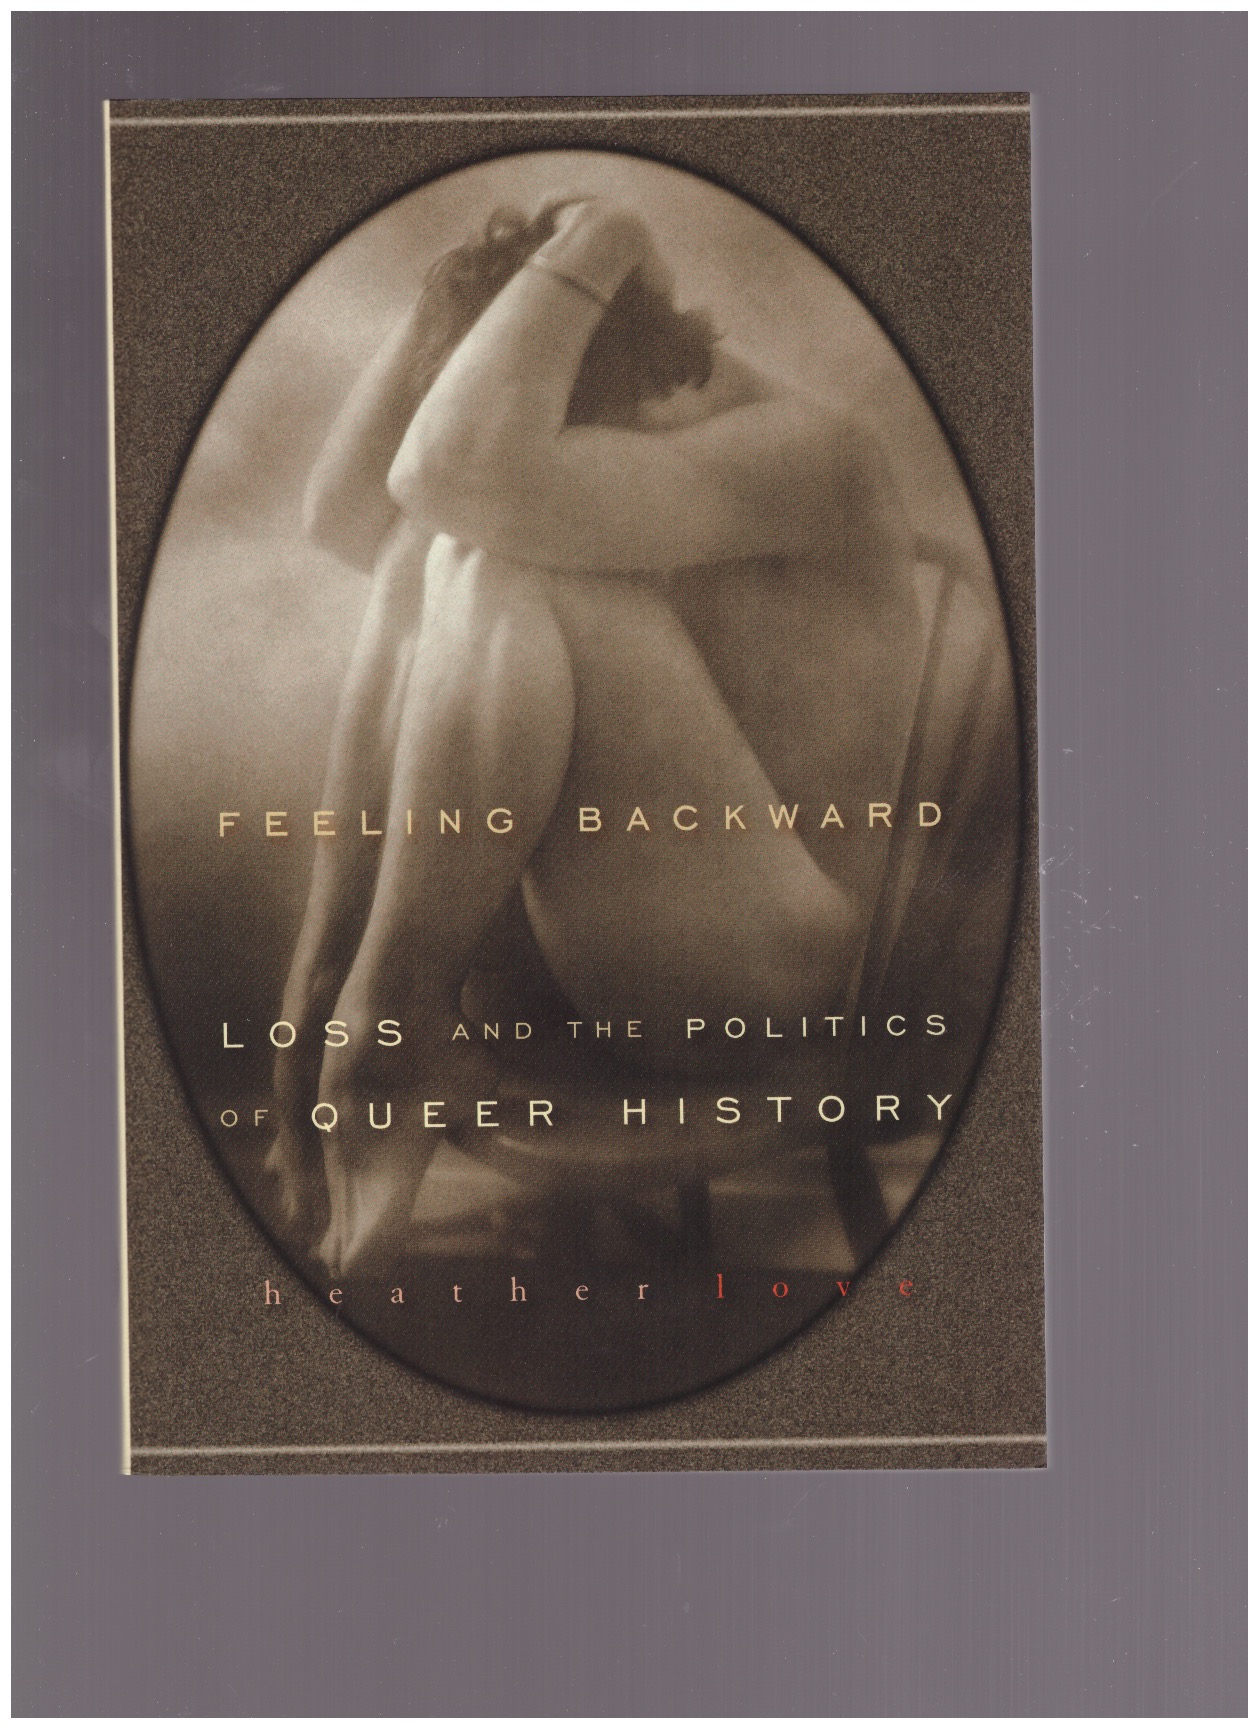 LOVE, Heather - Feeling backward. Loss and the politics of queer history